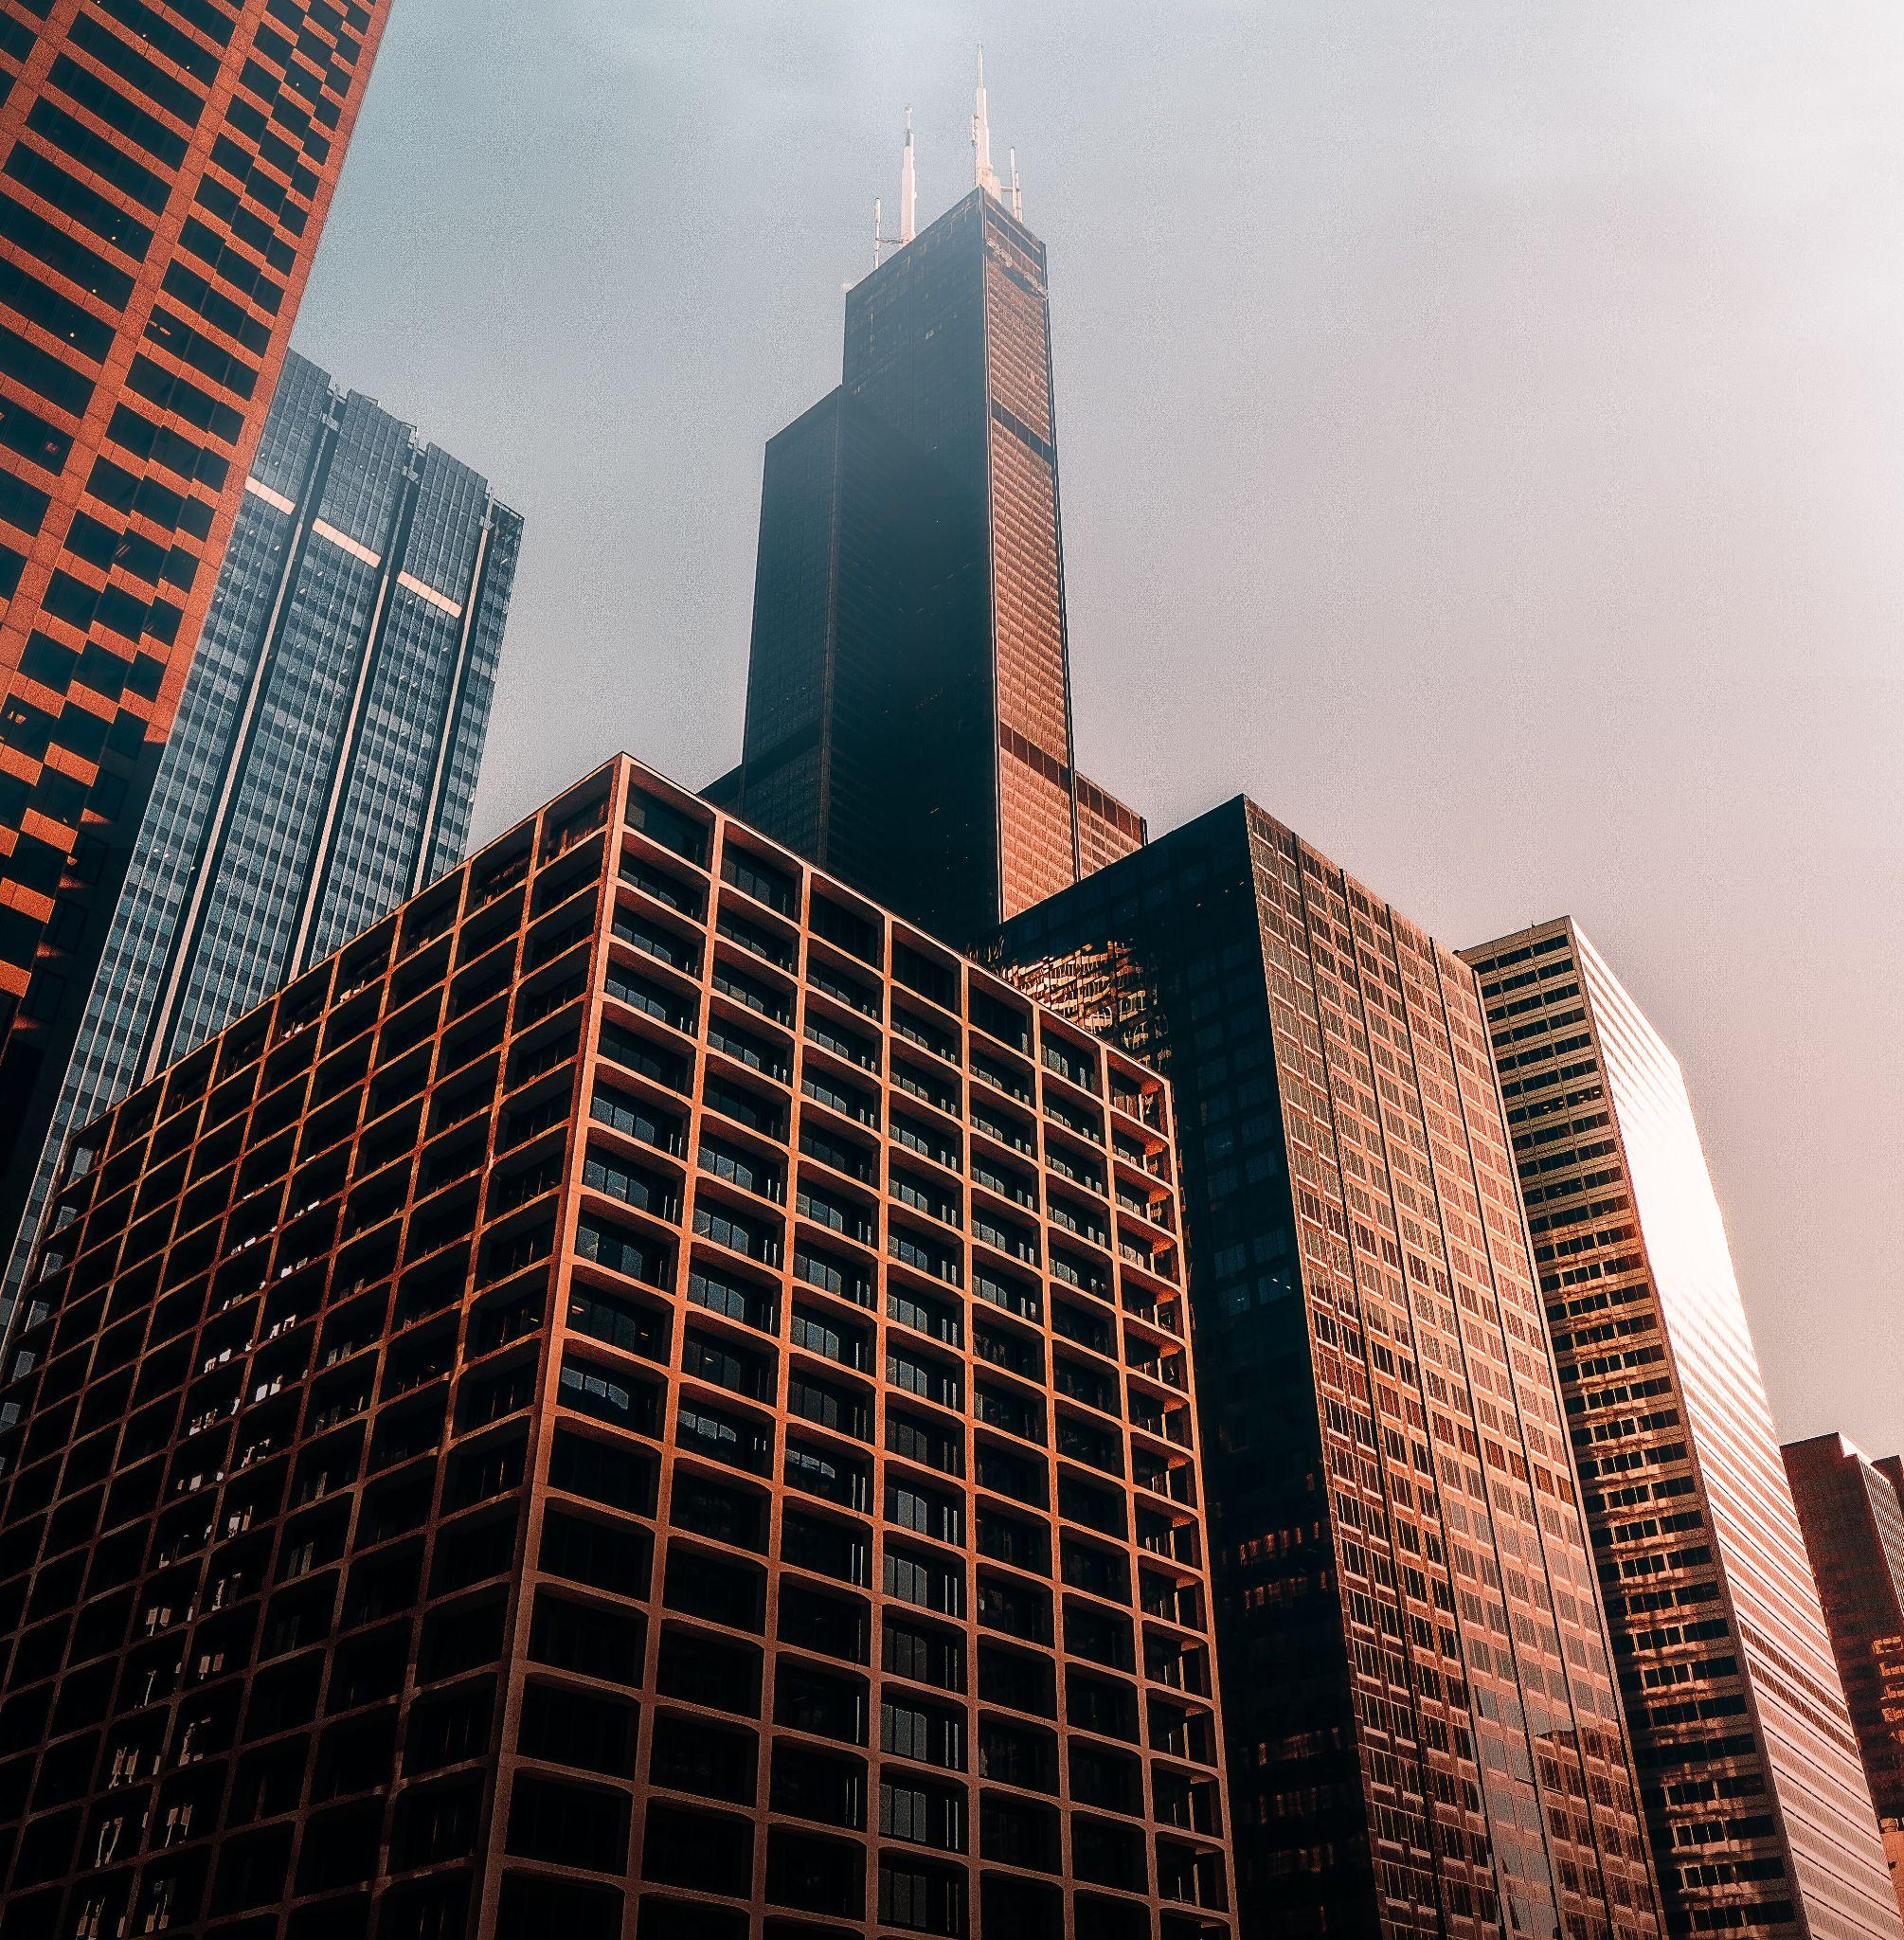 Willis Tower: a giant with numerous records and an interesting history